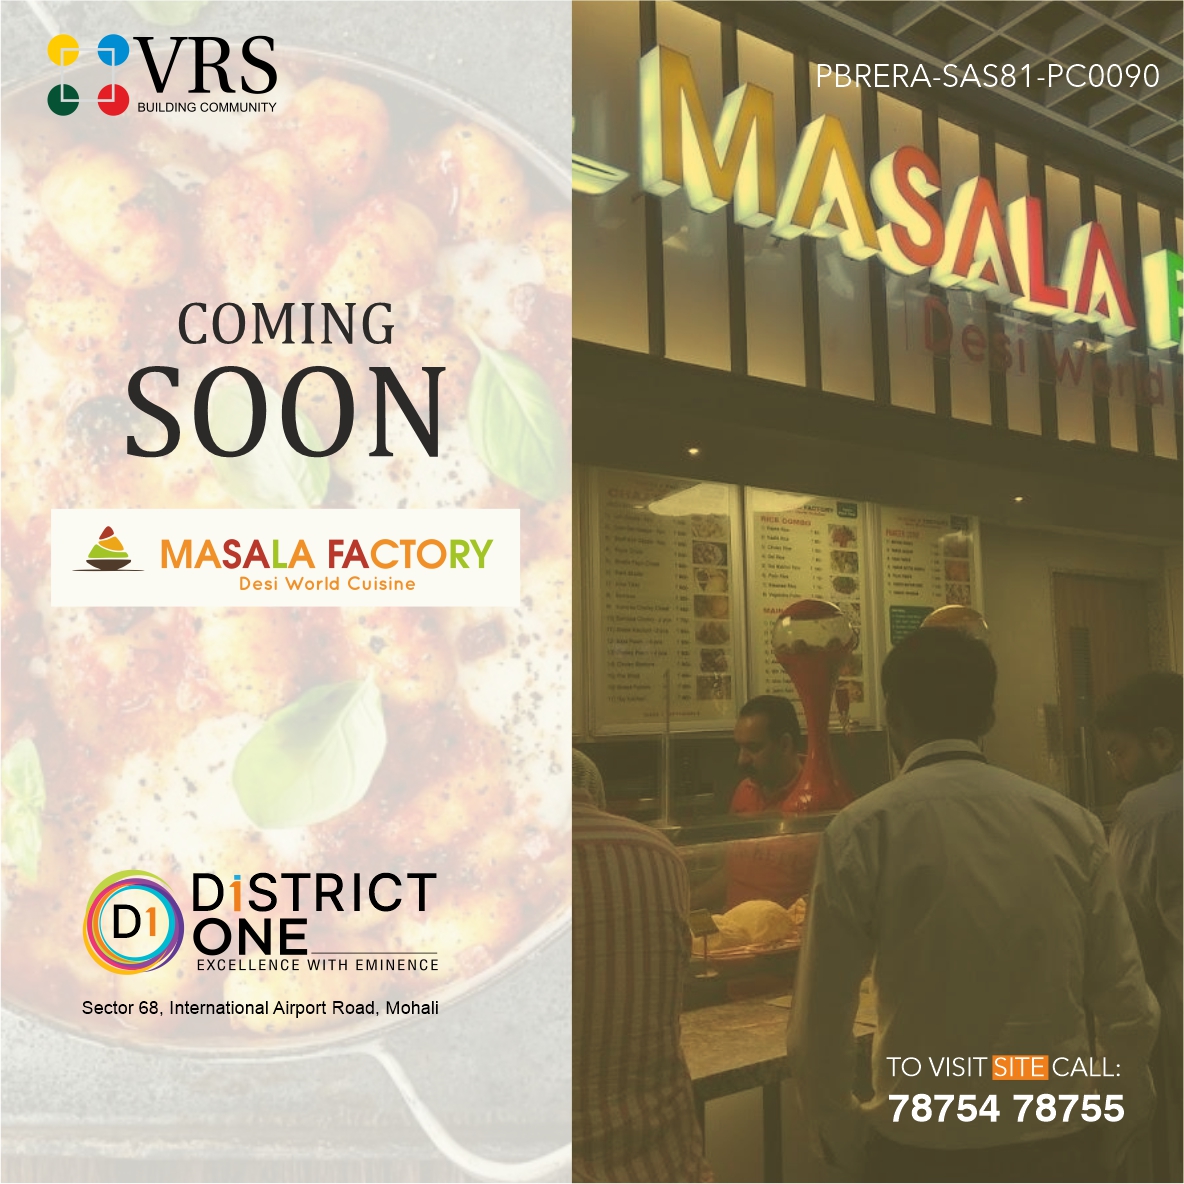 Enjoy modern yet classic Indian dishes with 𝐌𝐚𝐬𝐚𝐥𝐚 𝐅𝐚𝐜𝐭𝐨𝐫𝐲. Coming soon at District One.

#MasalaFactory #IndianDishes #Indianfood #BrandOpening #CommingSoon #DistrictOne #Mohali #VRS #VRSGroup